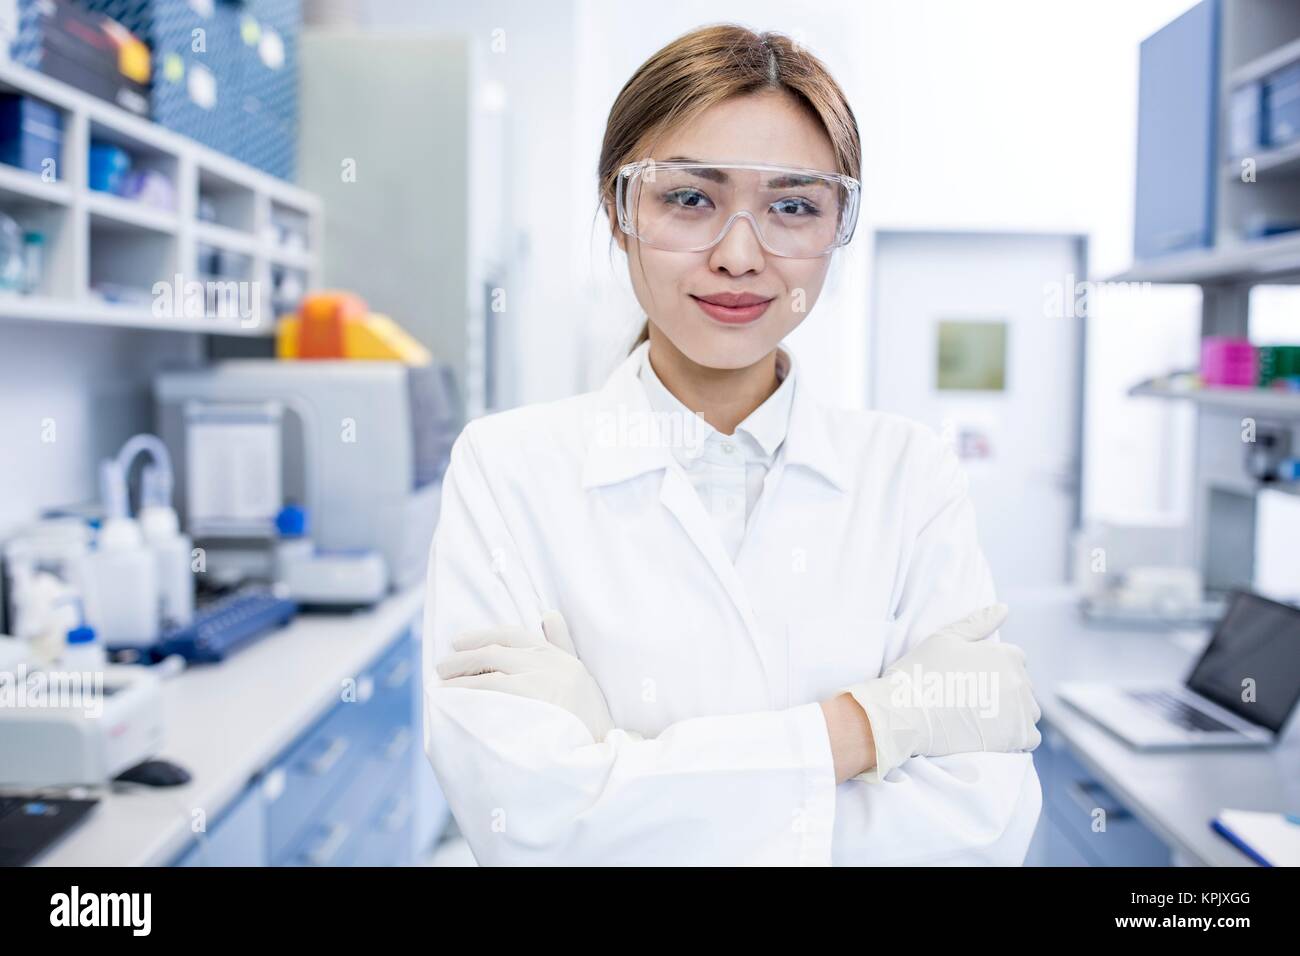 Female laboratory assistant with arms folded, portrait. Stock Photo